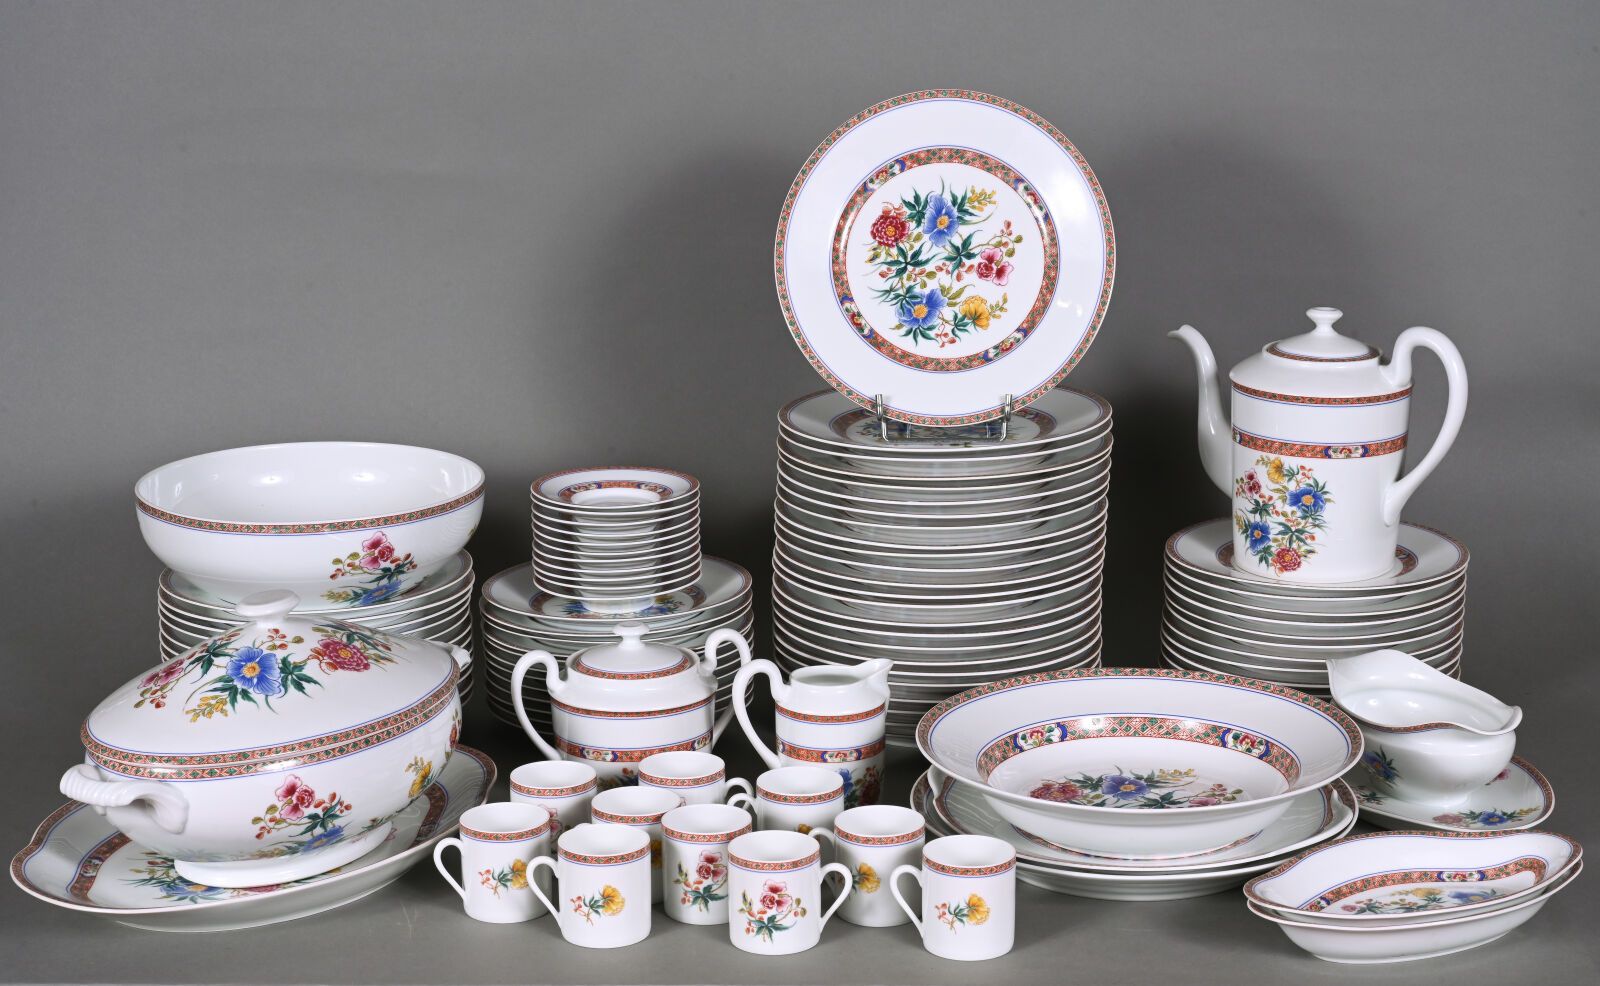 Null LIMOGES 
Porcelain dinner service with polychrome decoration of flowers and&hellip;